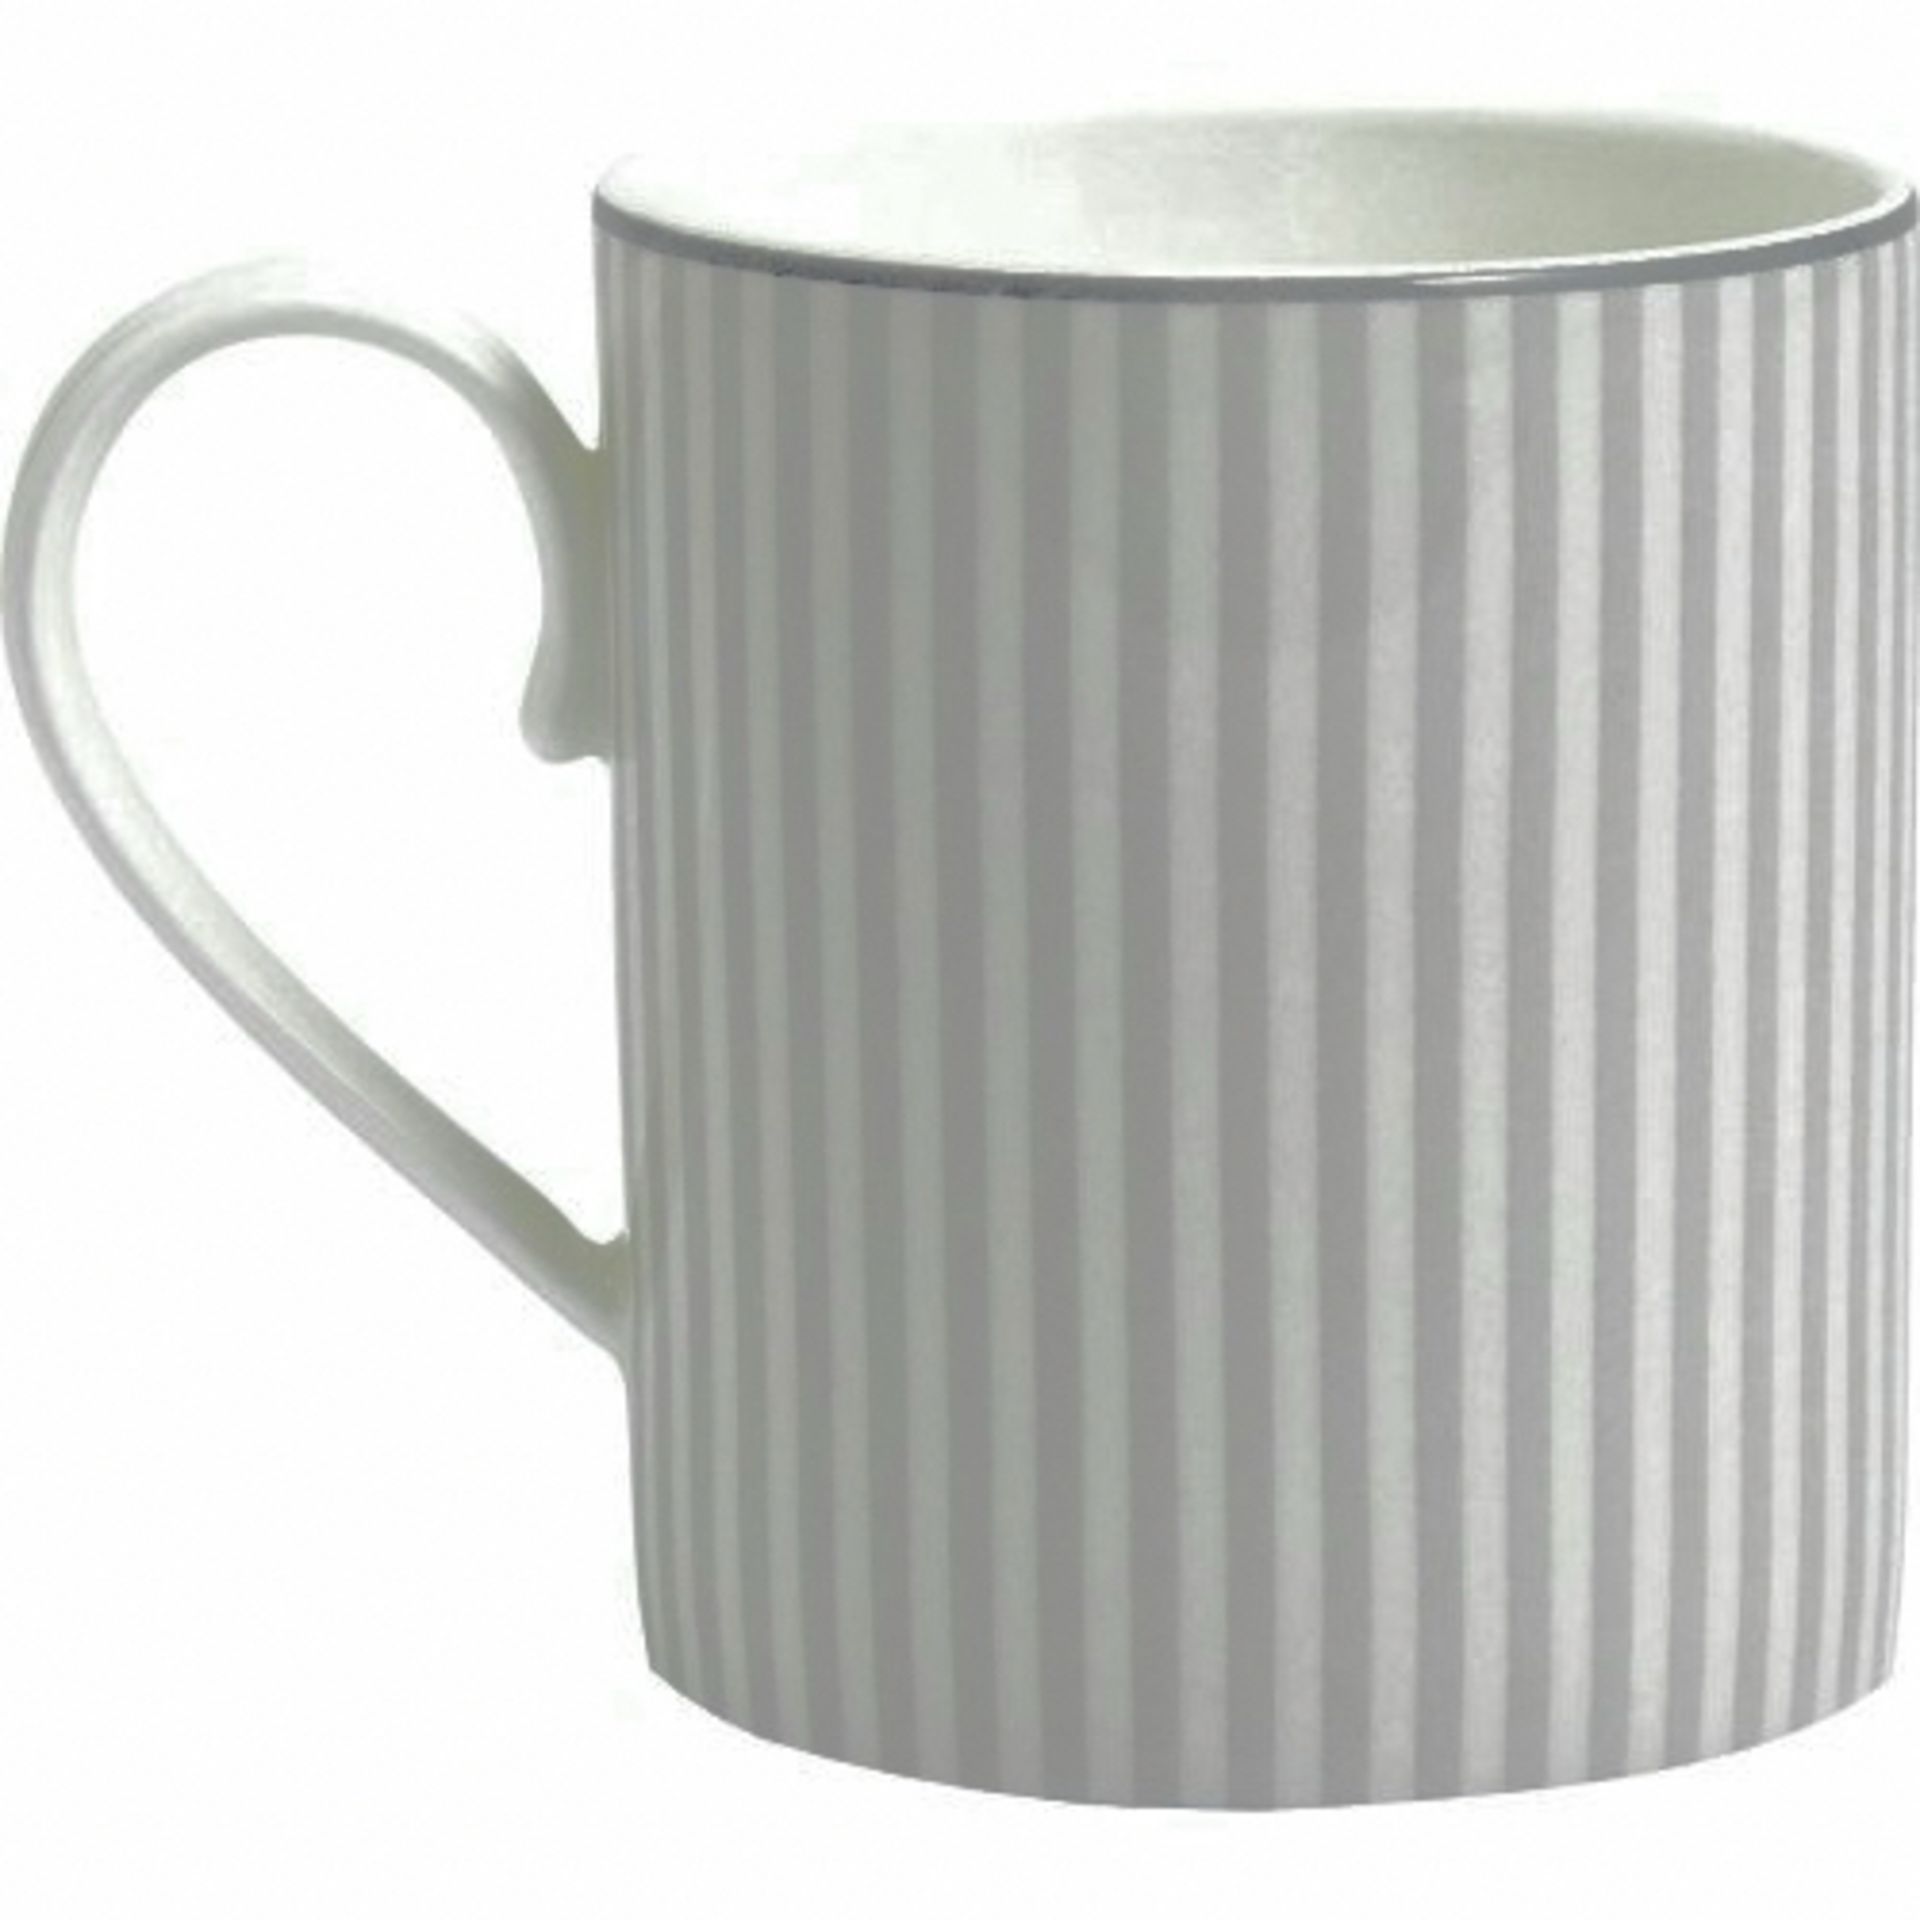 8 x M&S Hampton Mugs - White with Grey Stripe - Good Condition - Â£48 when new - Image 2 of 4